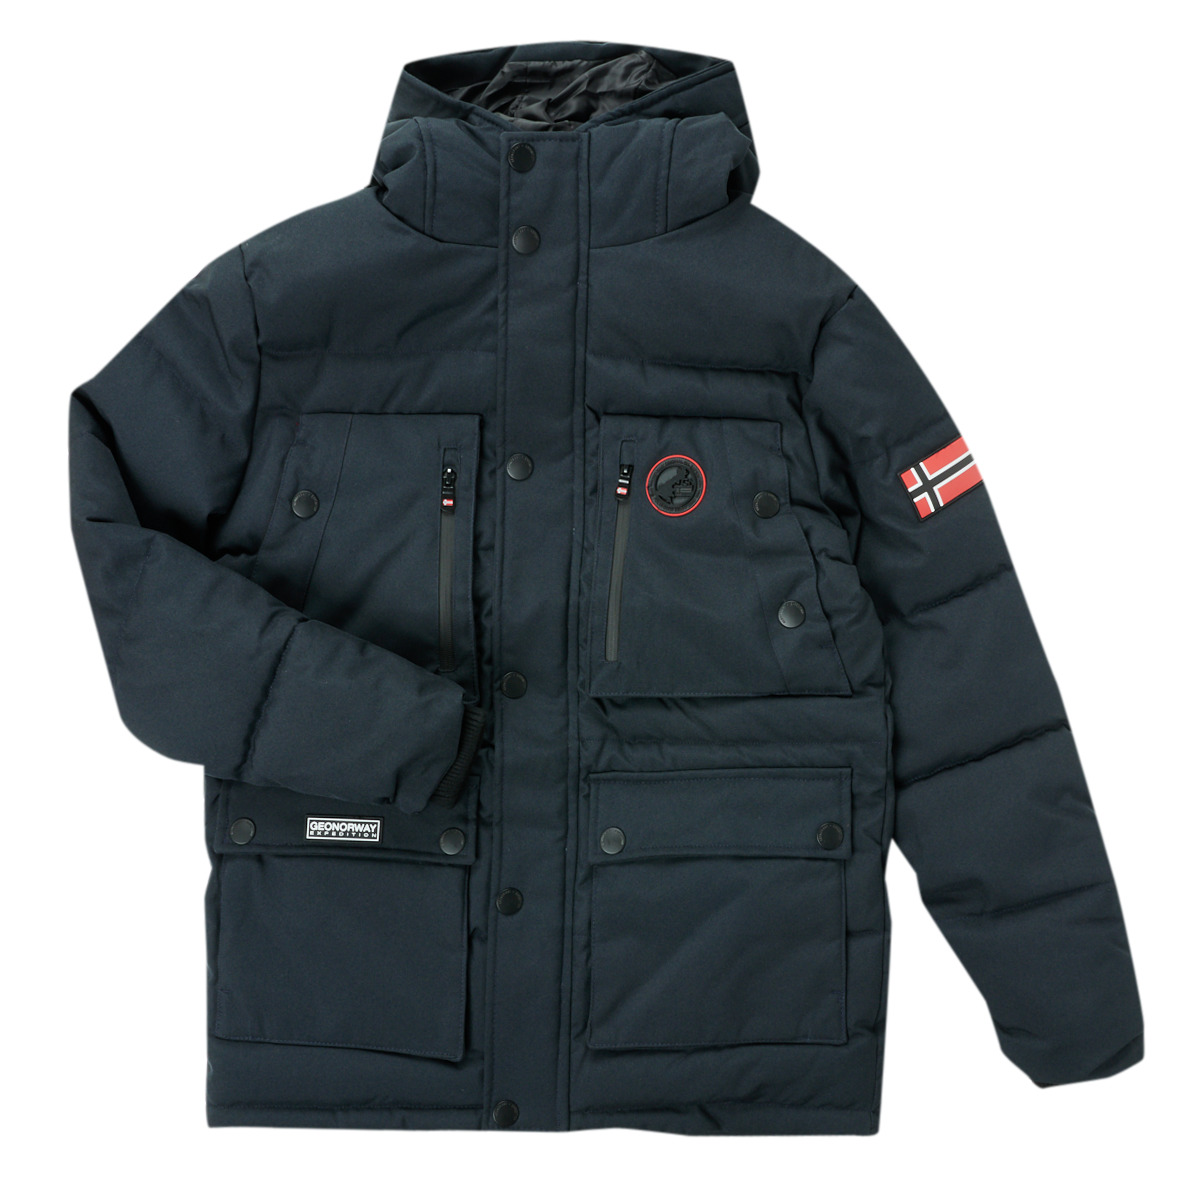 Geographical Norway Marine ALBERT 6r6dCRb3